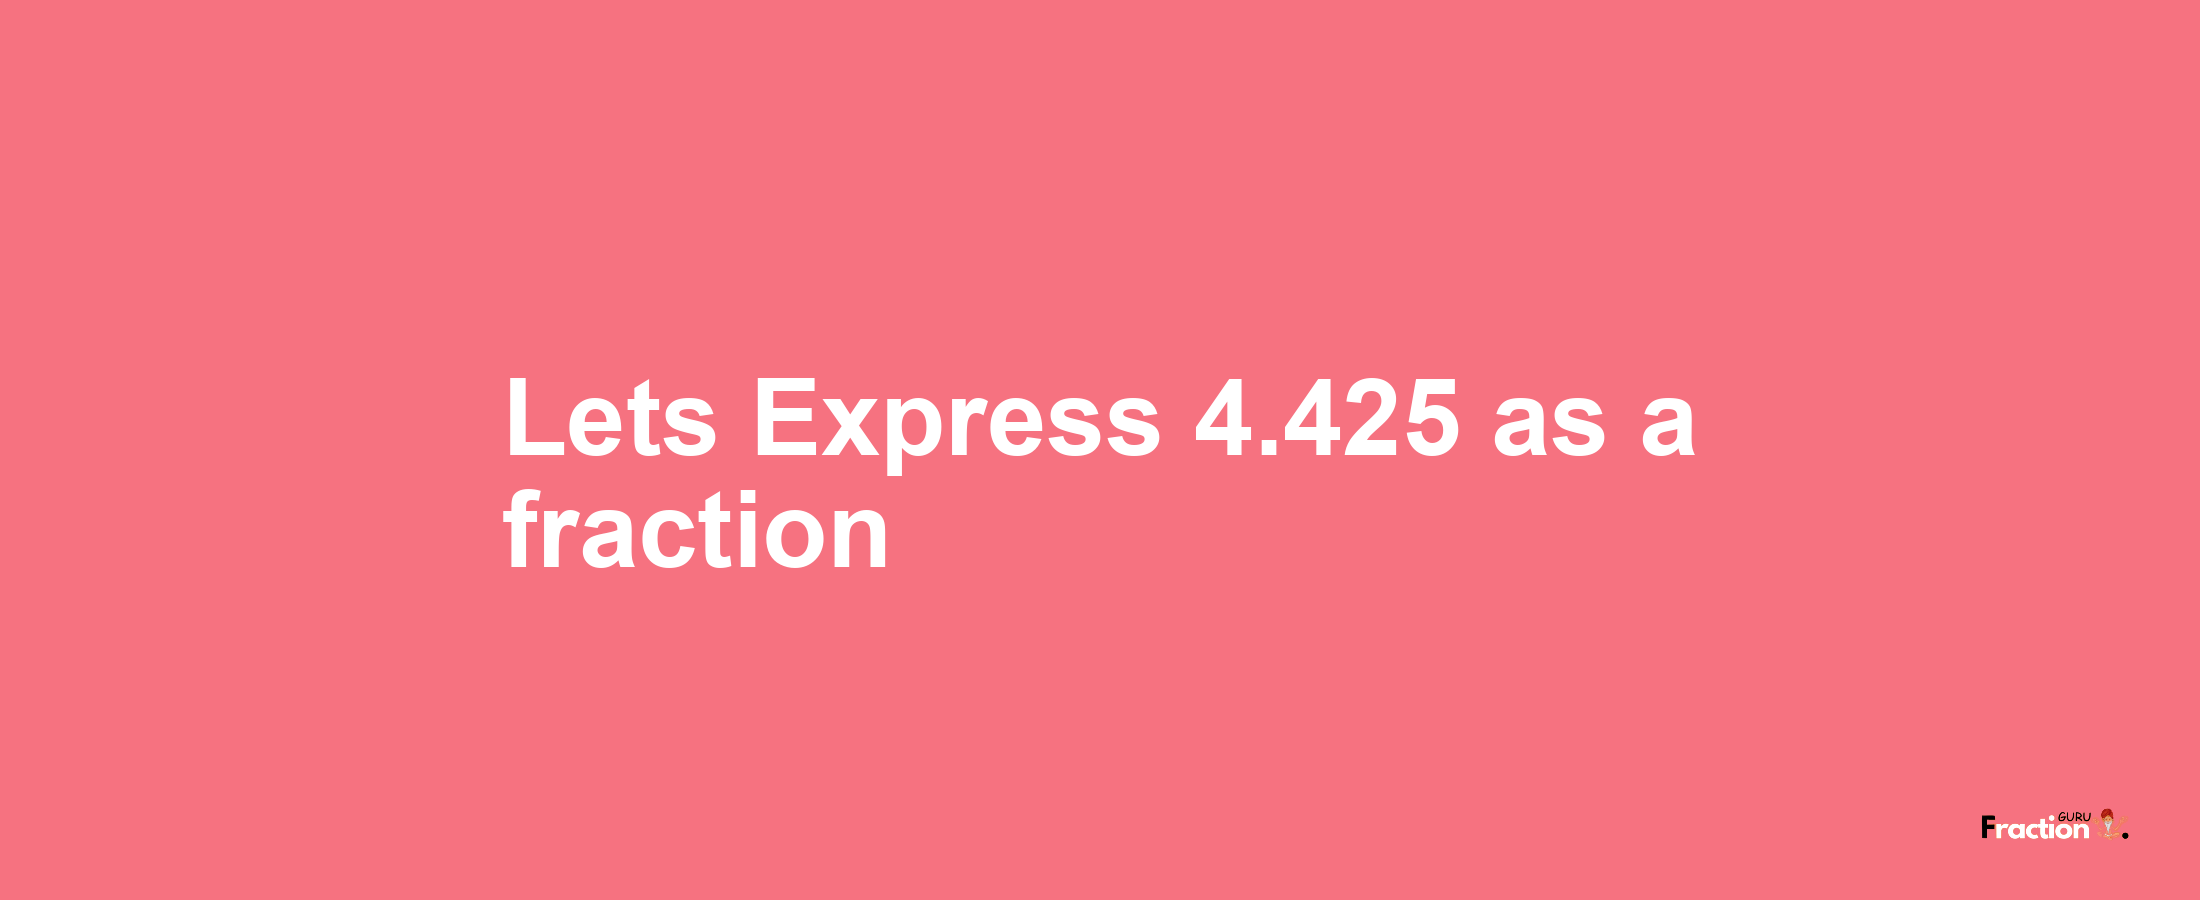 Lets Express 4.425 as afraction